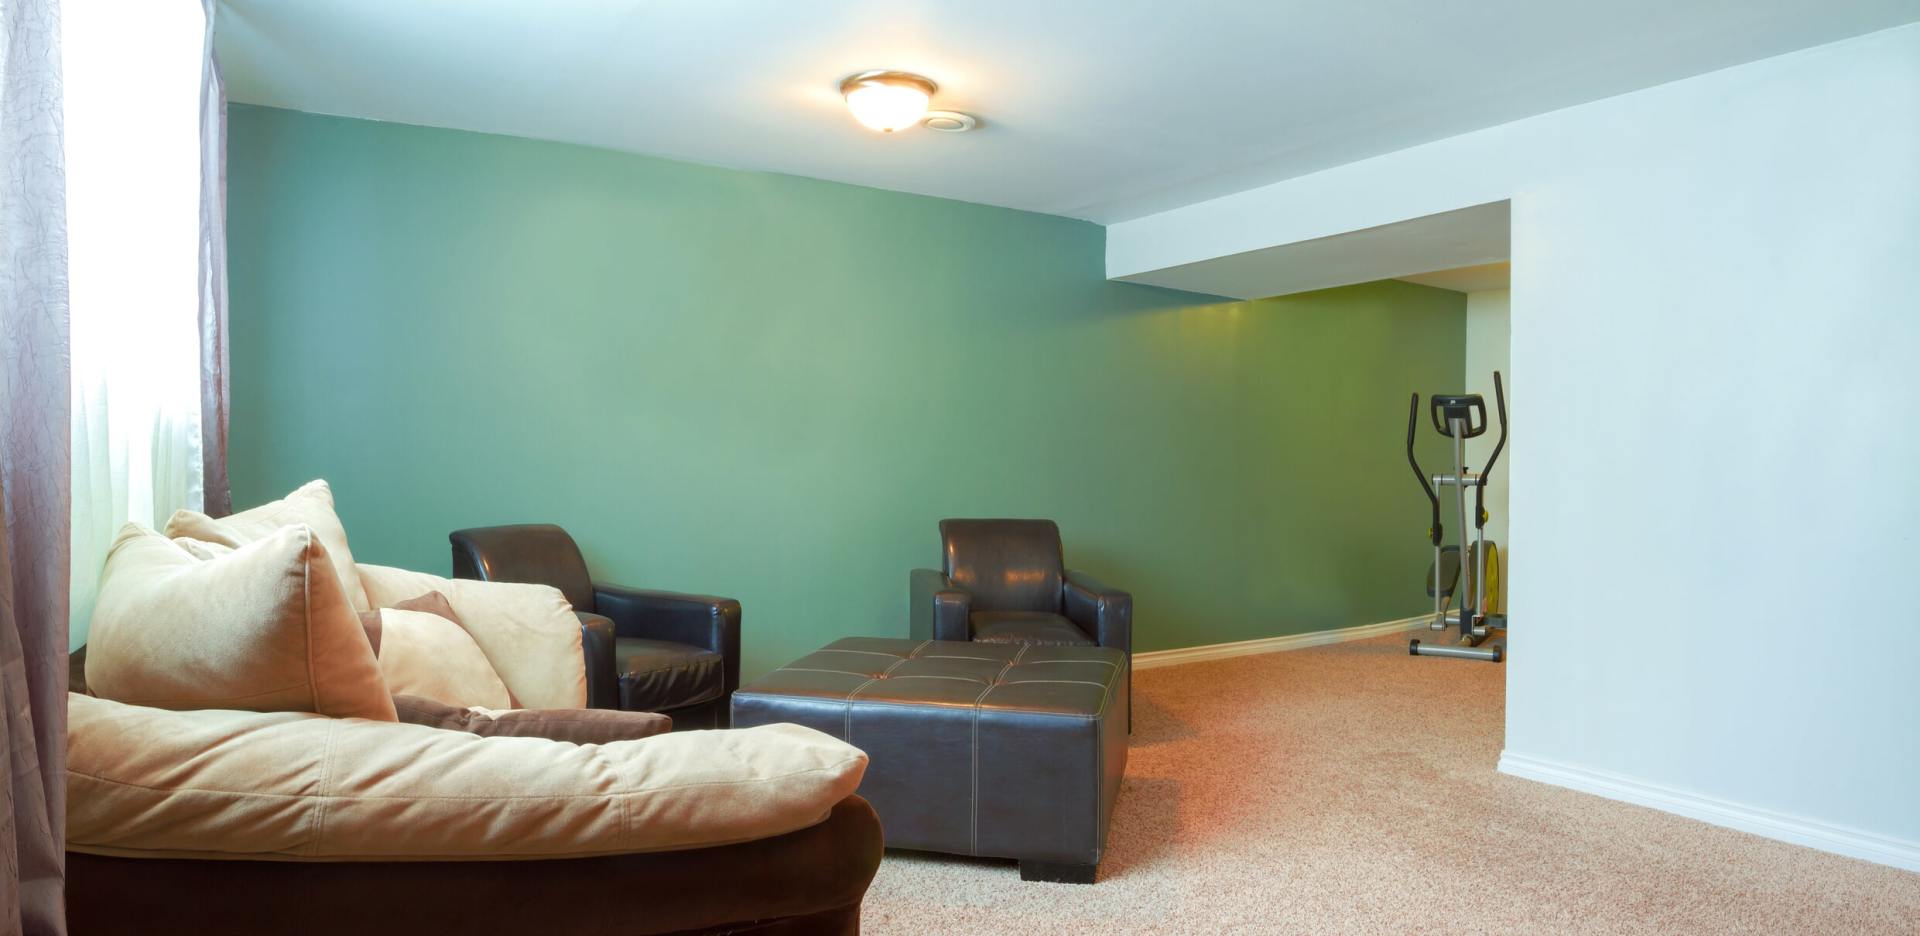 Basement Relaxing - Residential Remodeling Contractors in Channahon, IL